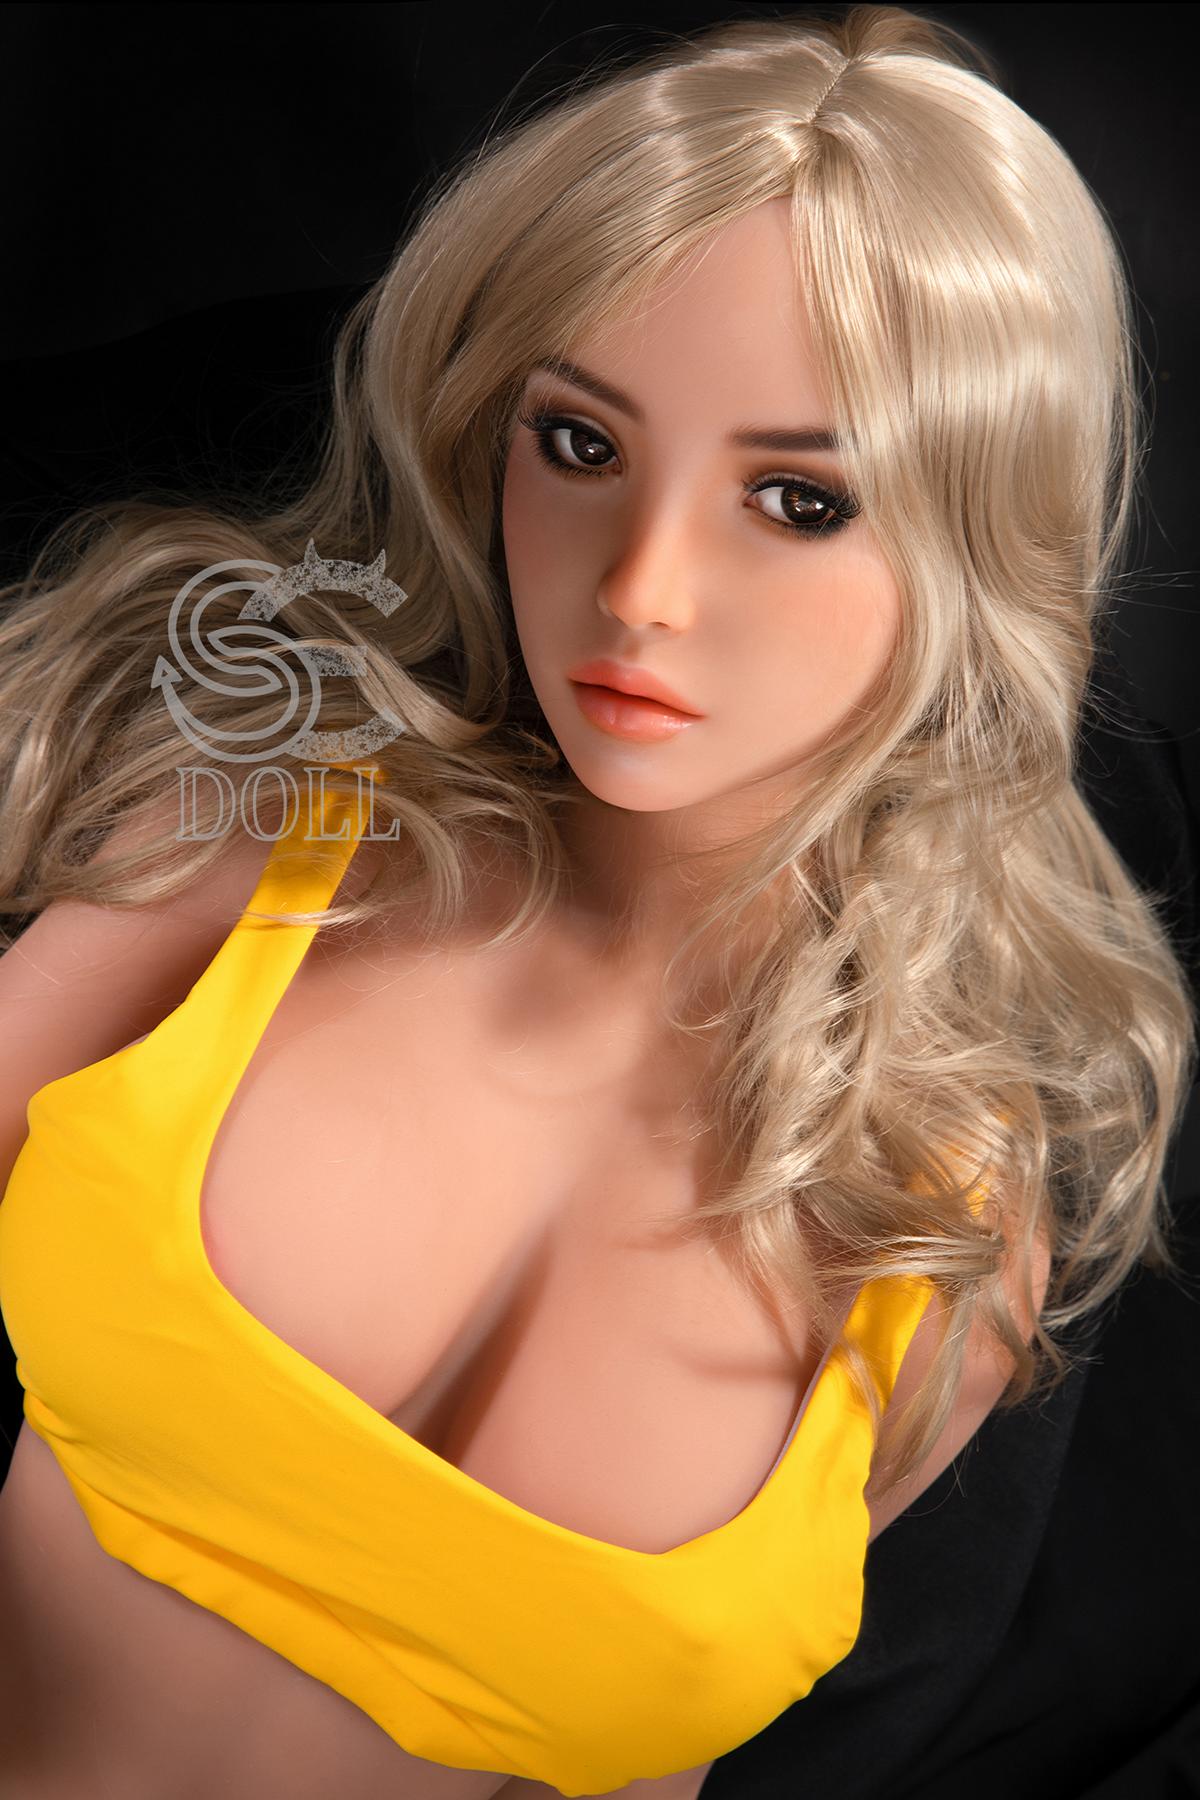 Love doll Jenny with blonde hair and big breasts